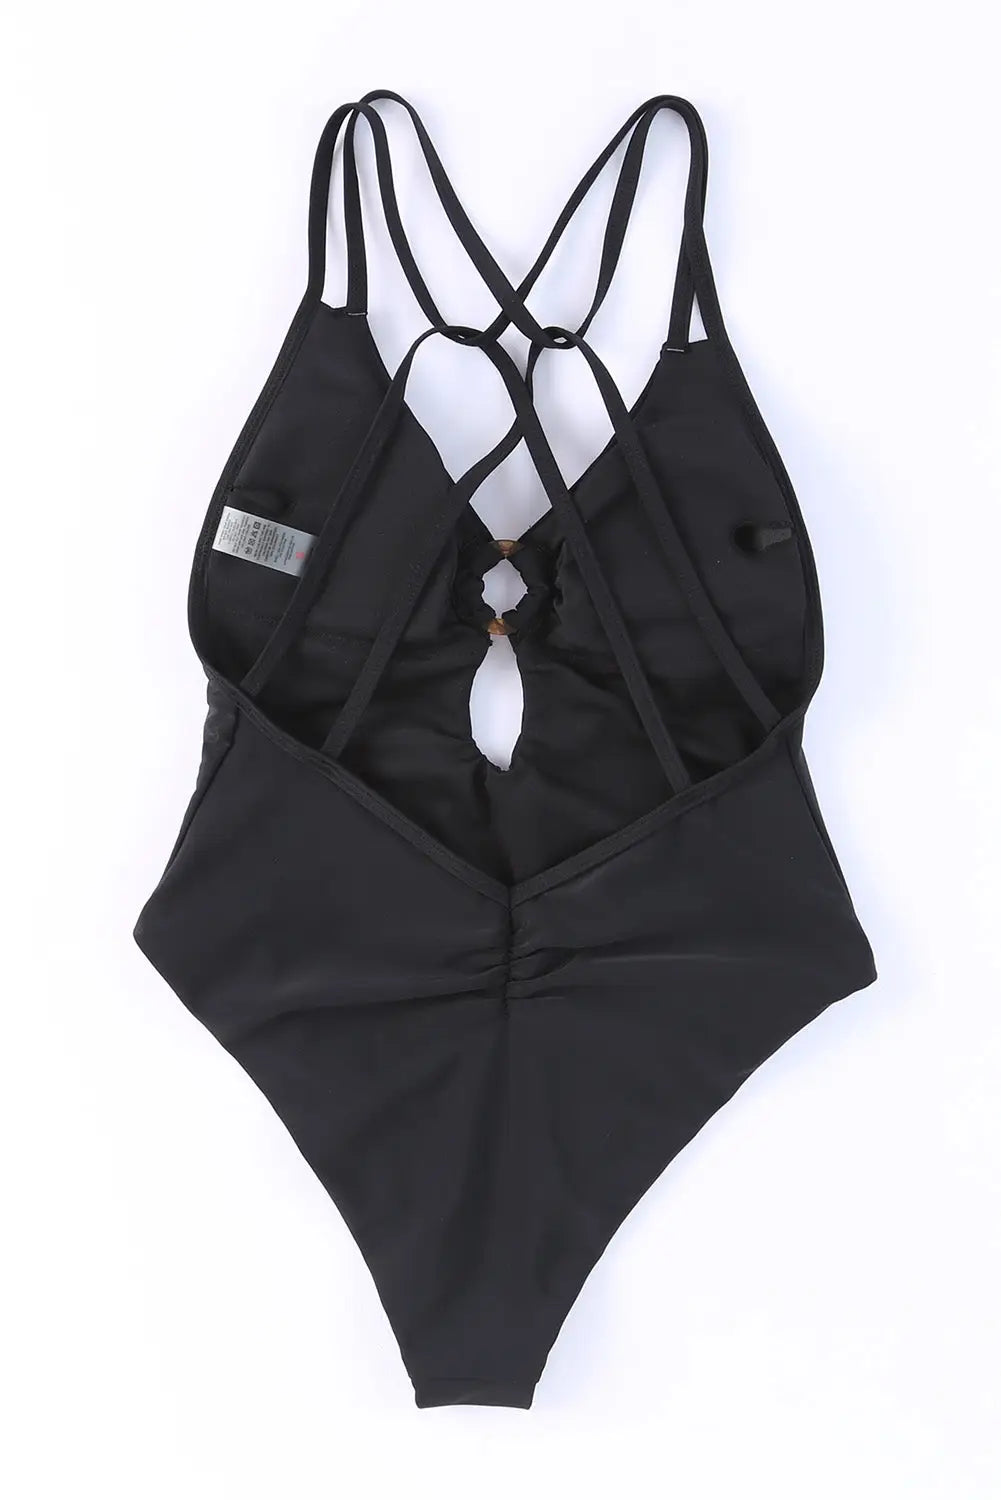 Black o-ring decor hollowed strappy one piece swimsuit -